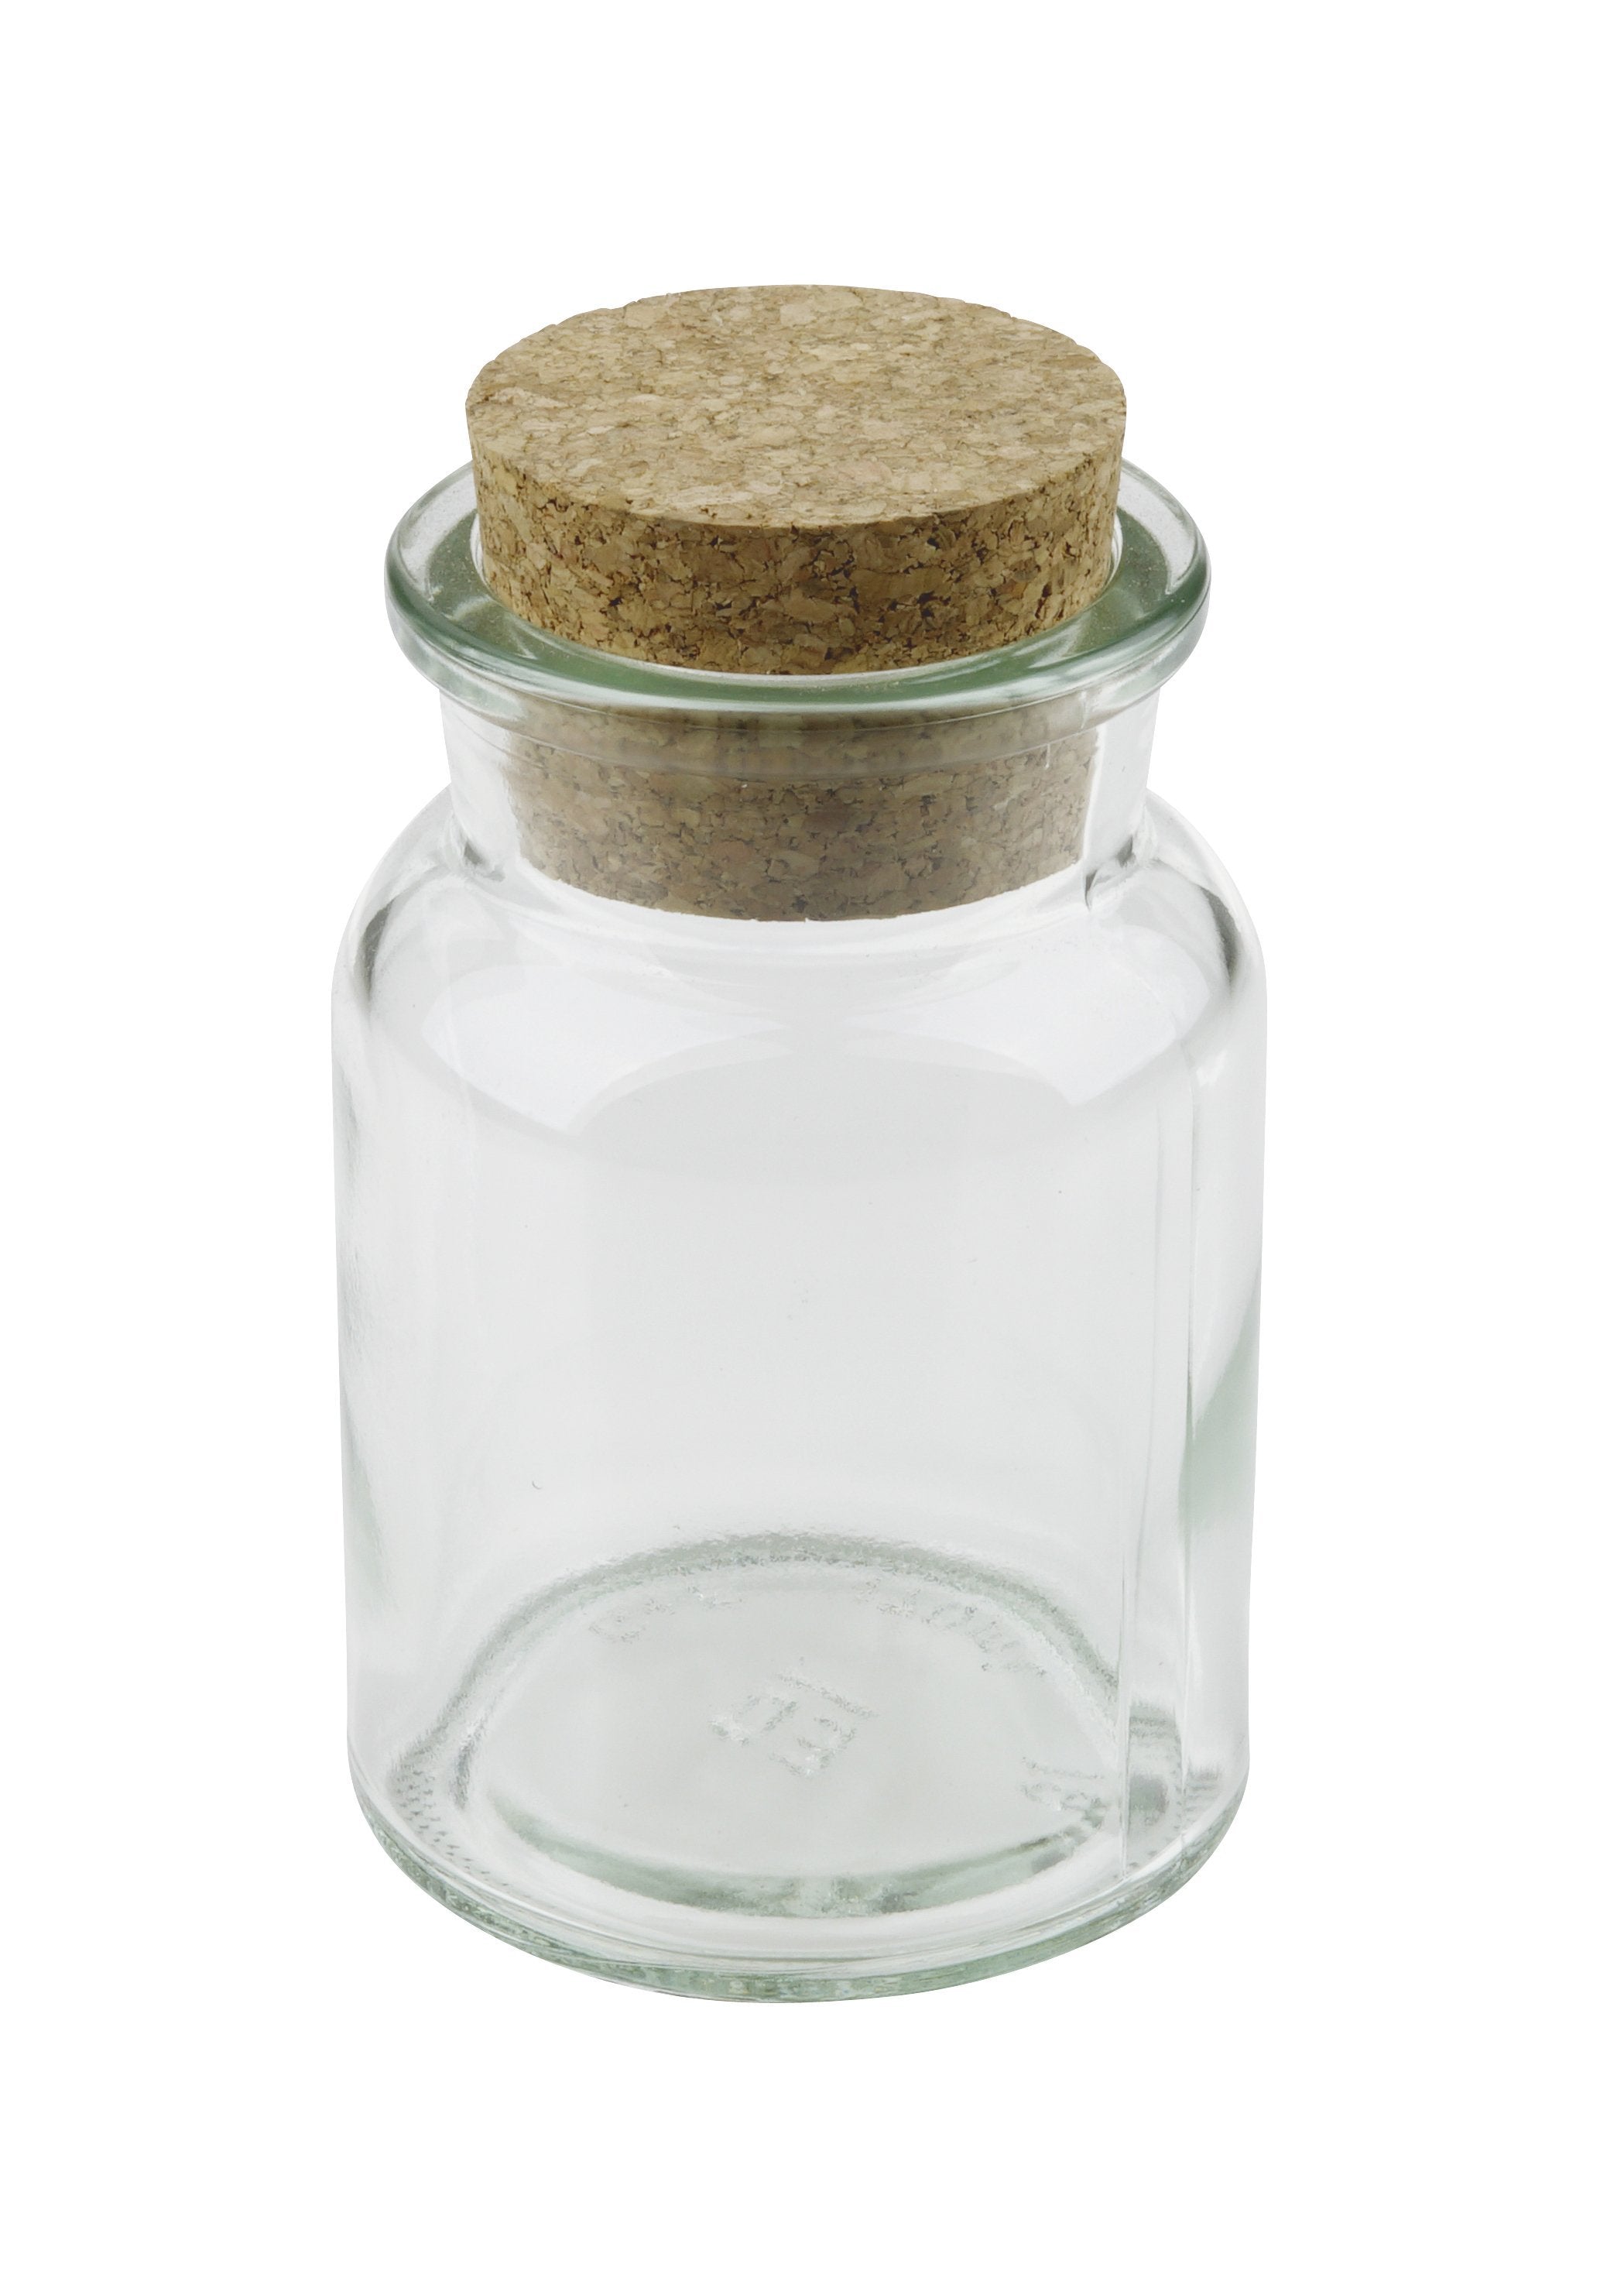 Dr. Oetker Storage Jar With Cork Lid 170 Ml - Whole and All